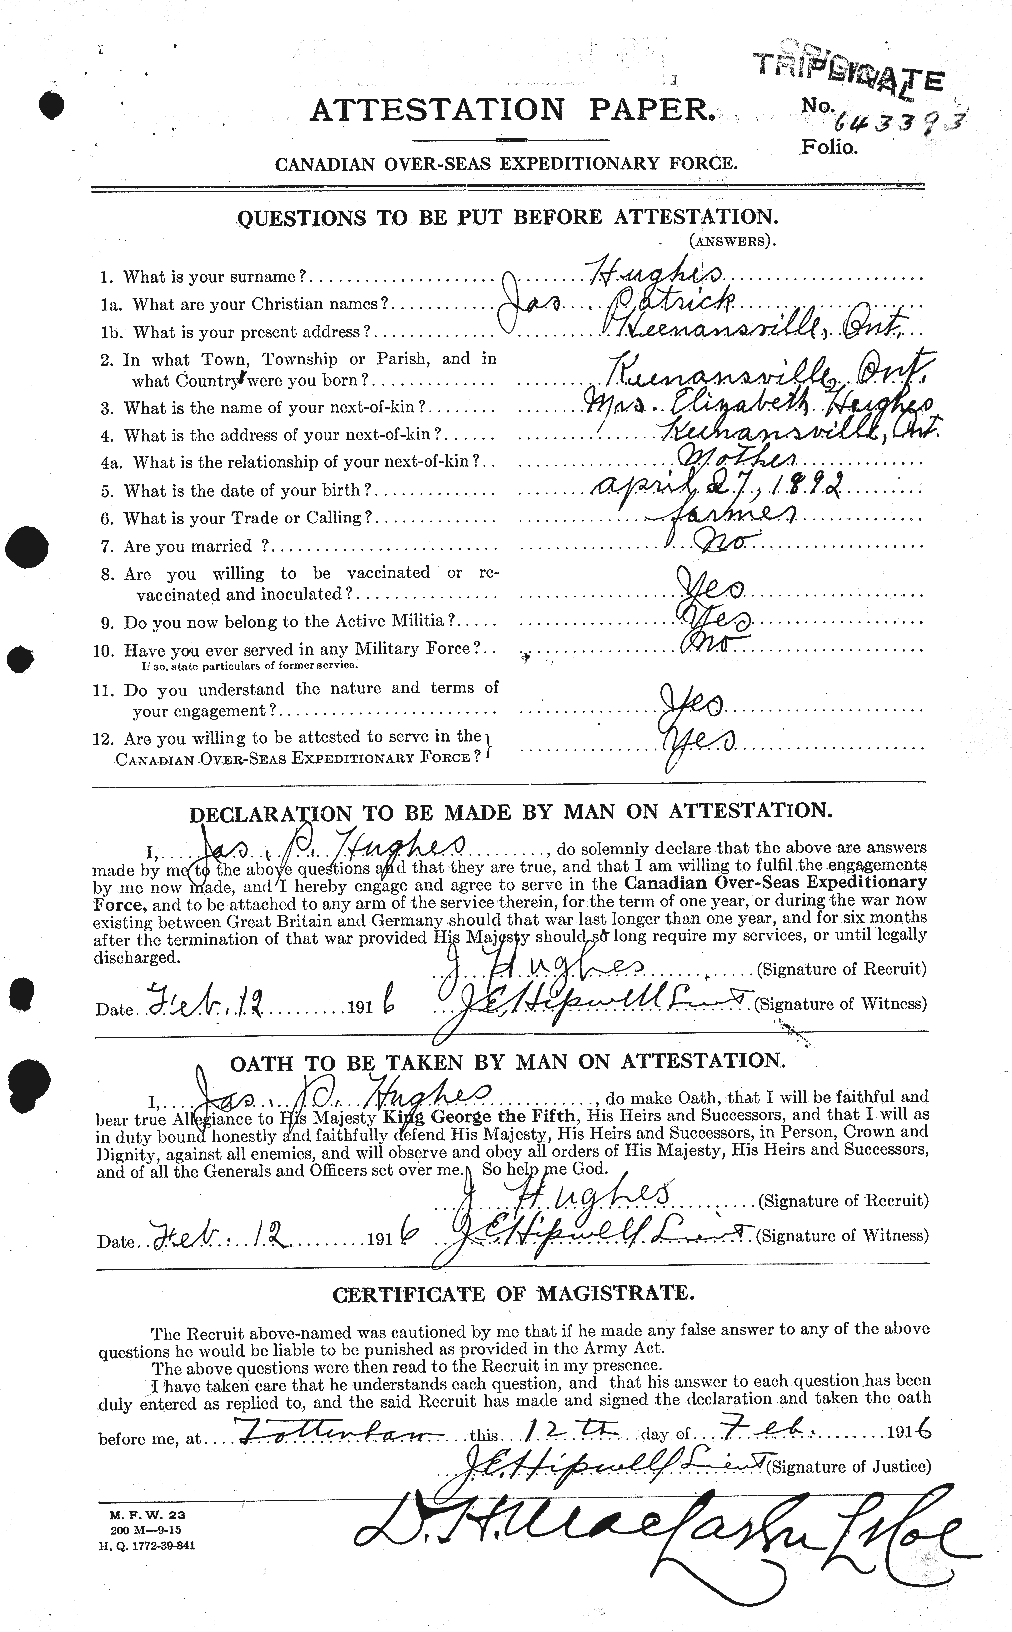 Personnel Records of the First World War - CEF 403970a